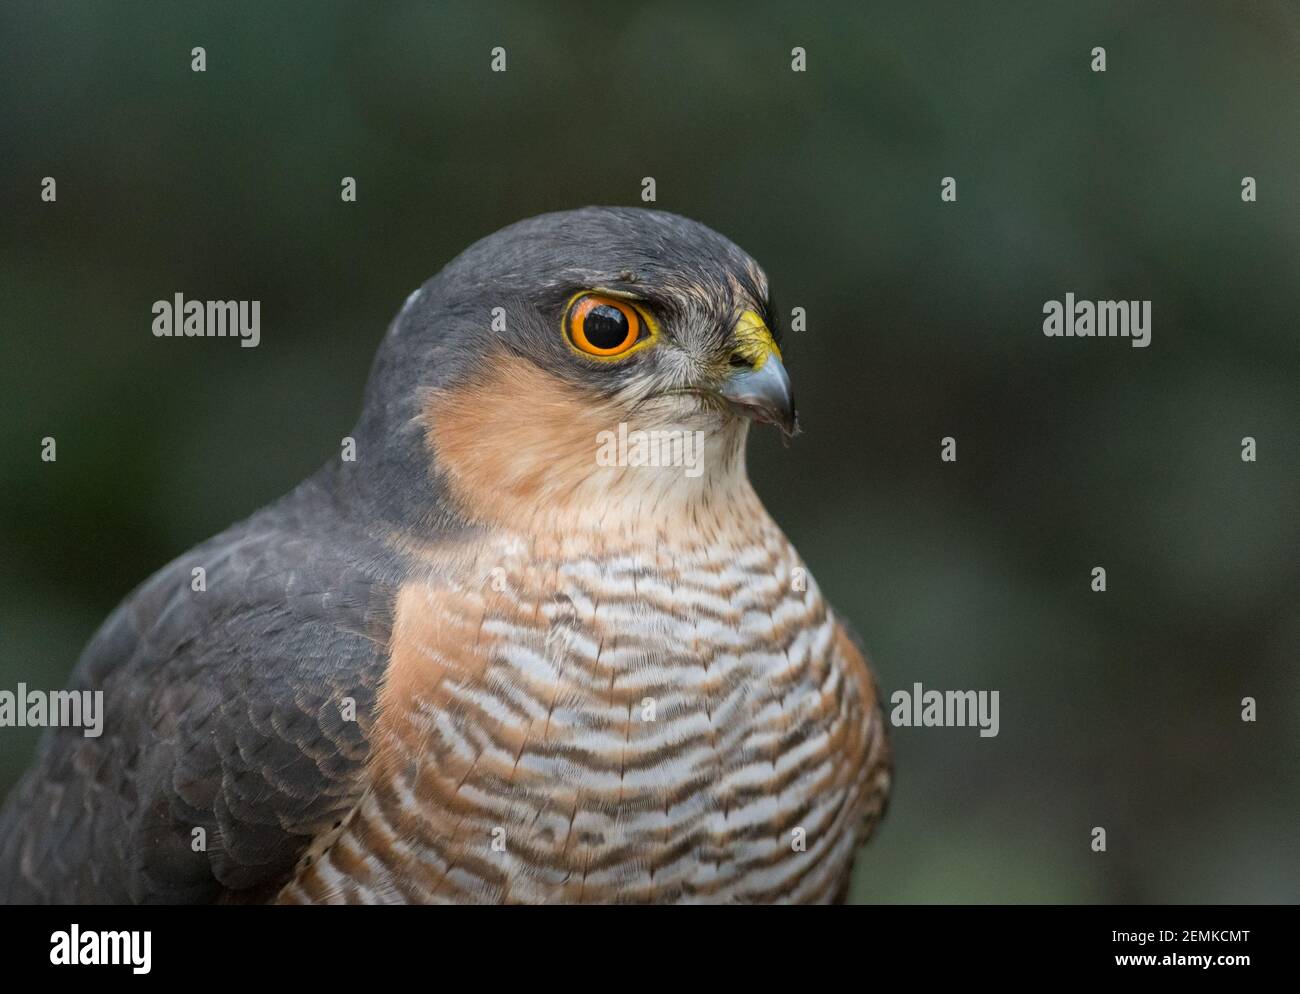 A close up of an adult male European Sparrowhawk (Accipiter nisus) on prey, taken in a suburban garden in Swindon, Wiltshire. Stock Photo